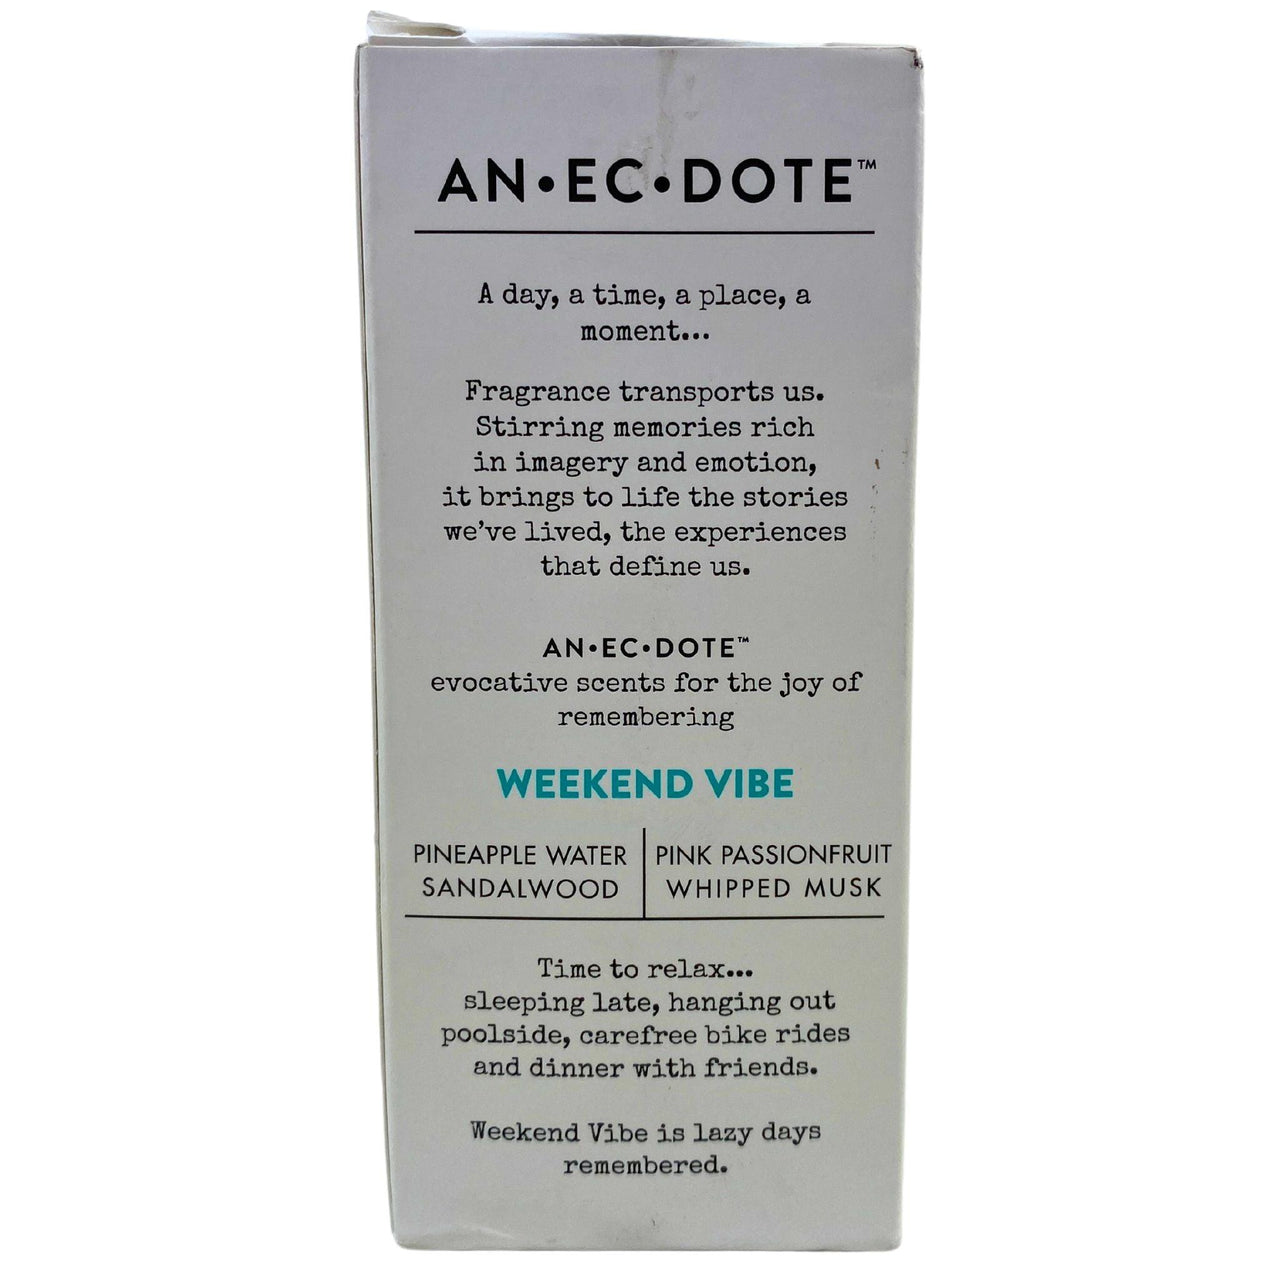 Anecdote Weekend Vibe Pineapple Water Sandalwood|Pink Passionfruit Whipped Musk 3.4OZ (50 Pcs Lot) - Discount Wholesalers Inc